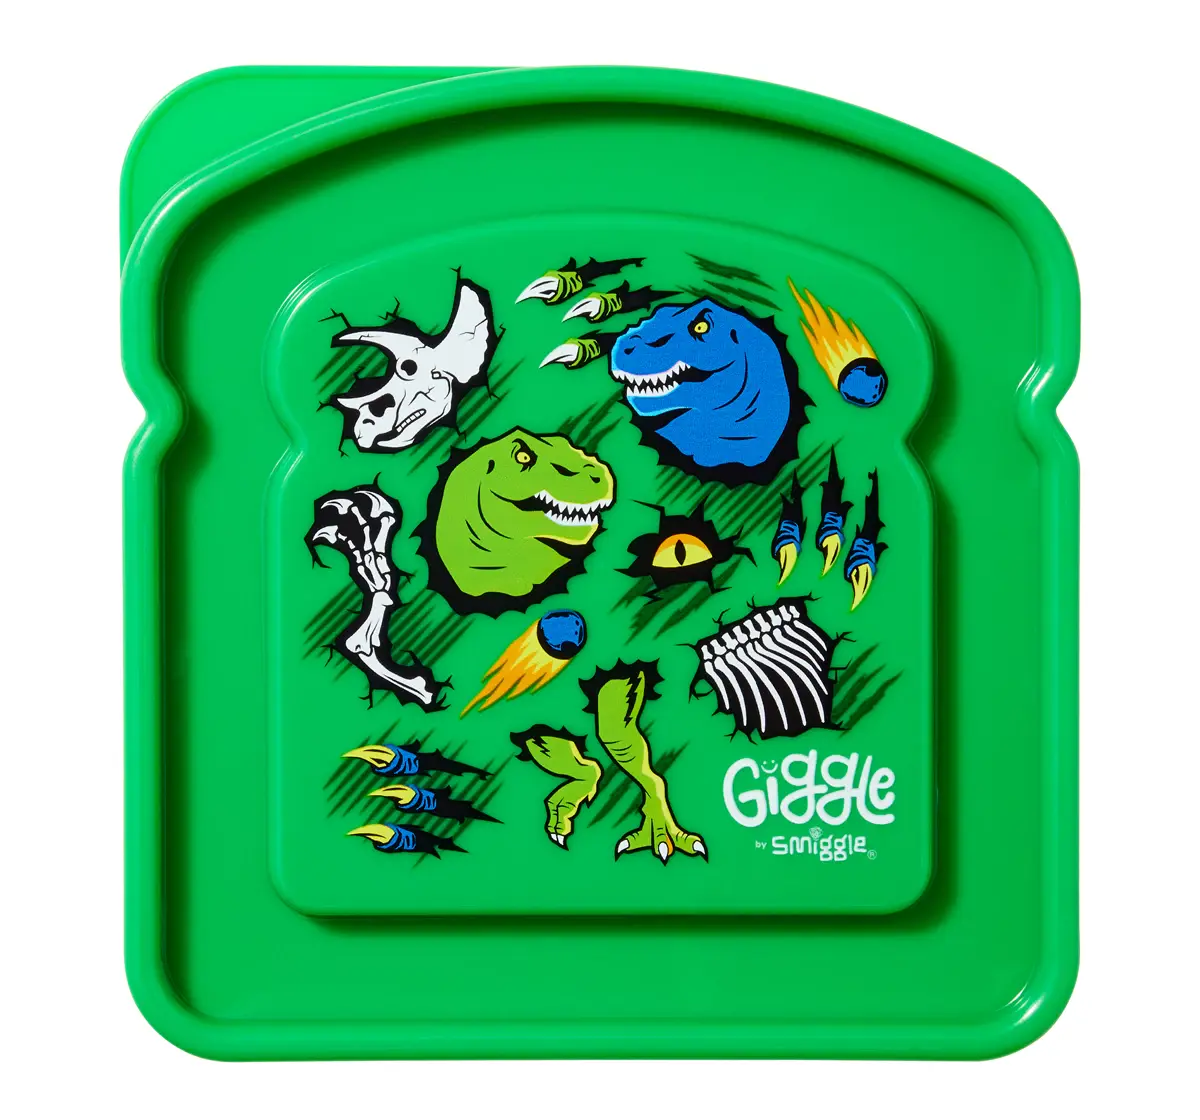 Smiggle Giggle 7 Sandwich Container, Green, 3Y+